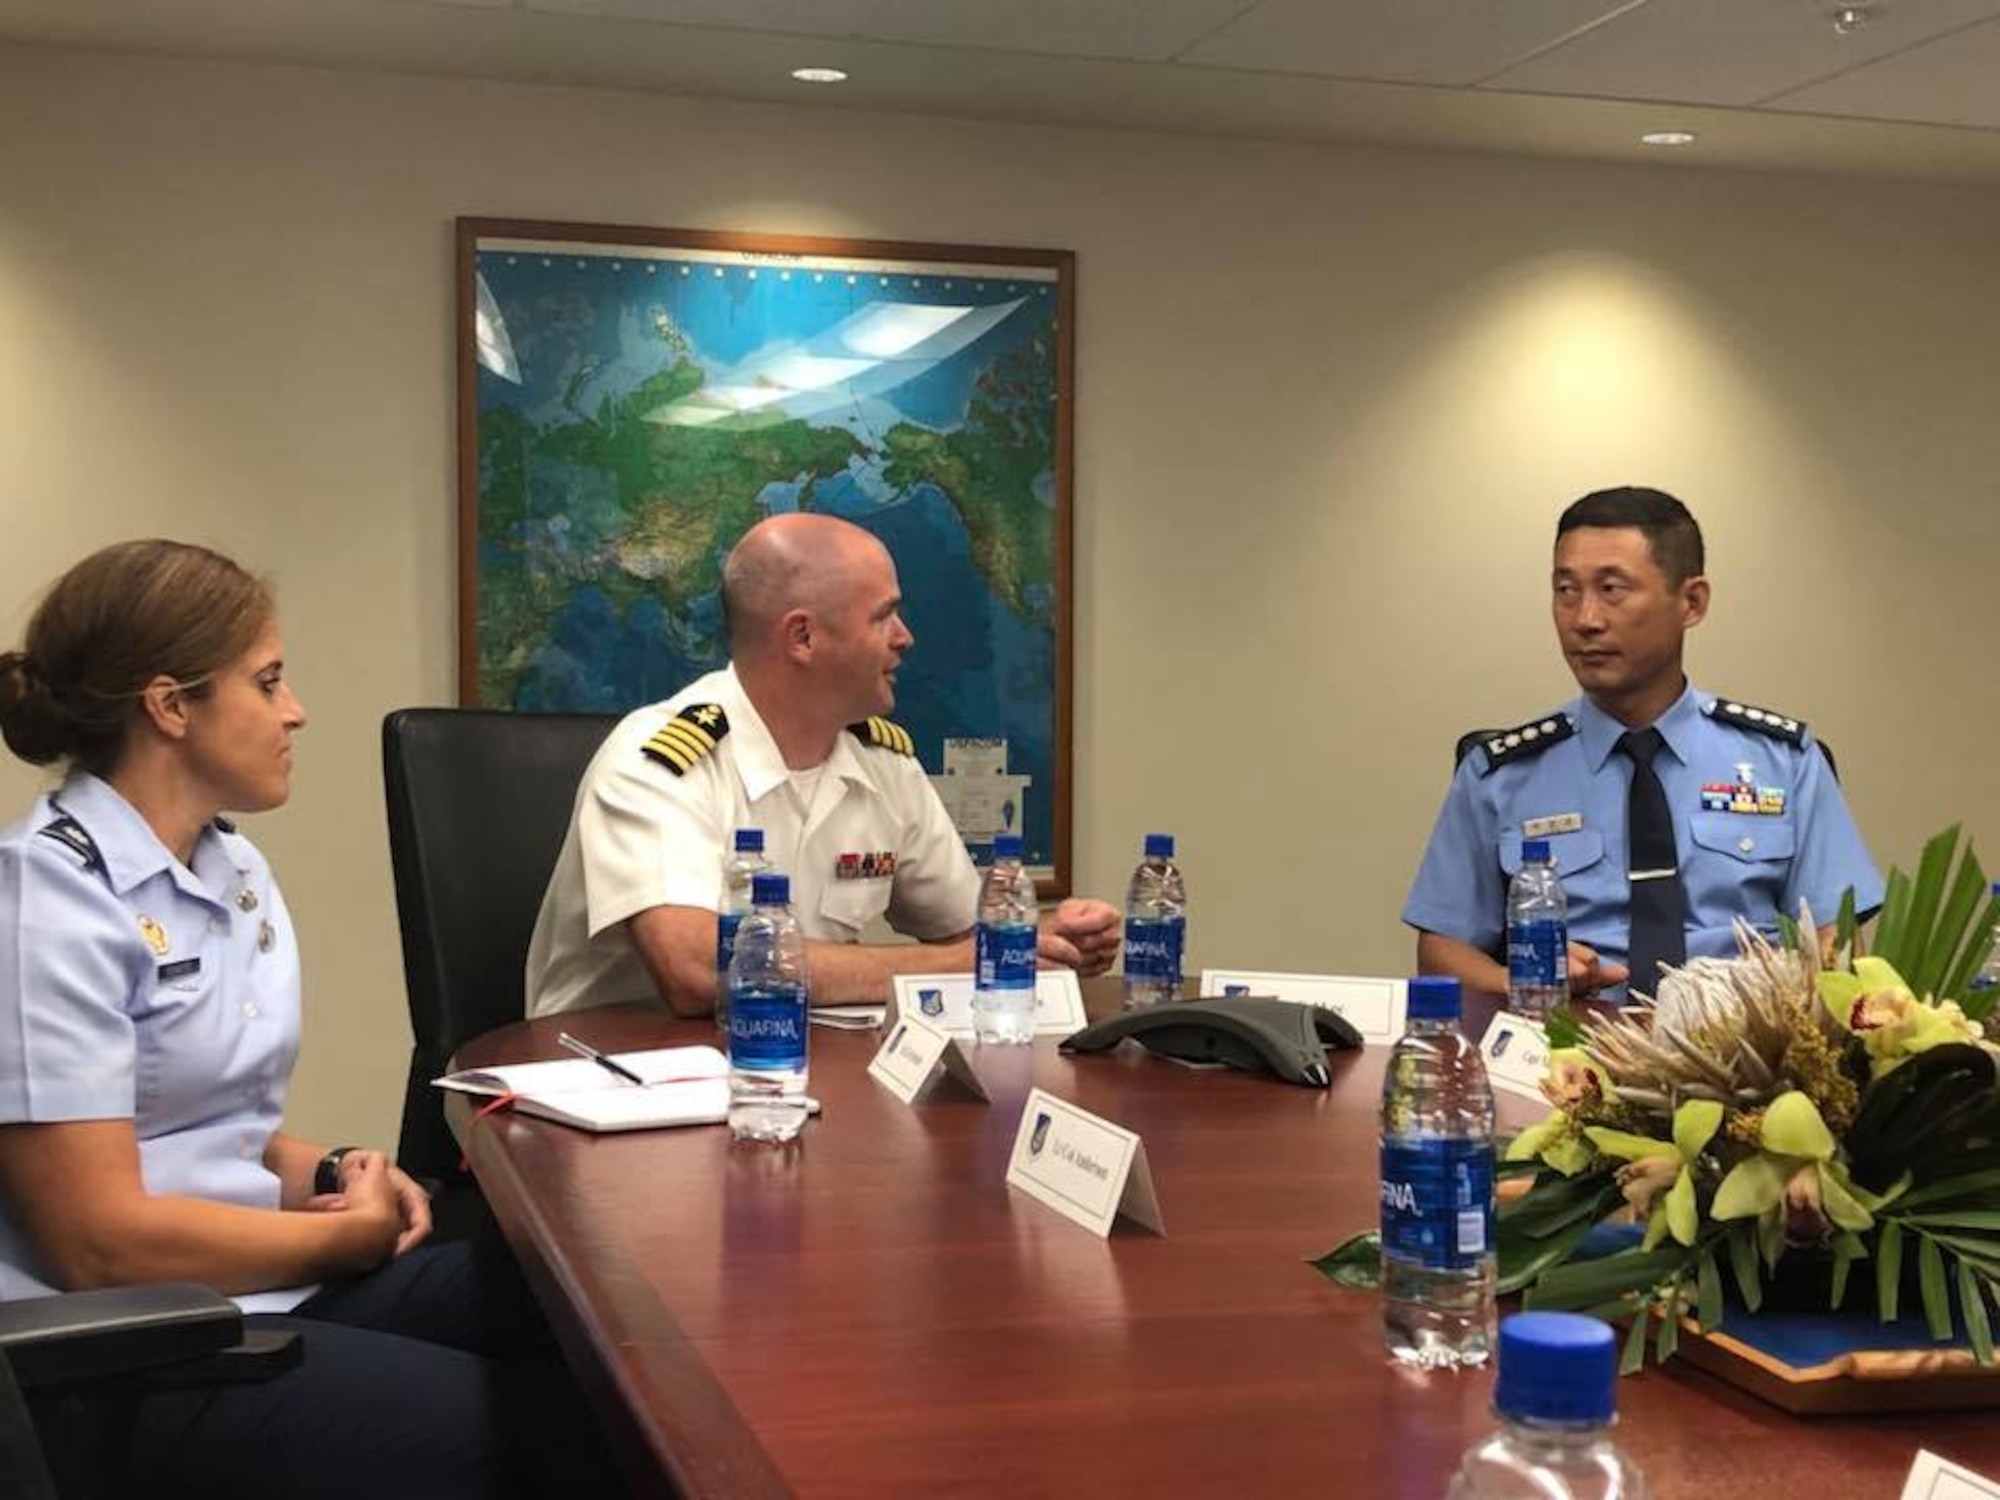 U.S. Navy Capt. William Kafka, Indo-pacific Command Public Affairs Officer and Air Force Lt. Col. Megan Schafer, Pacific Air Forces PA Director brief Republic of Korea Air Force Col. Sang-kyu Lee, Cheif of PA, about the importance of strategic communication at Joint Base Peral Harbor-Hickam, Hawaii Sept. 11, 2018. ROKAF officers visited PACAF/PA to discuss the importance of communicating in an integrated, synchronized, and purposeful way to build a united PA system capable of achieving common operational goals in case of emergencies and bilateral operations. (U.S. Air Force photo by Master Sgt. Nadine Y. Barclay)